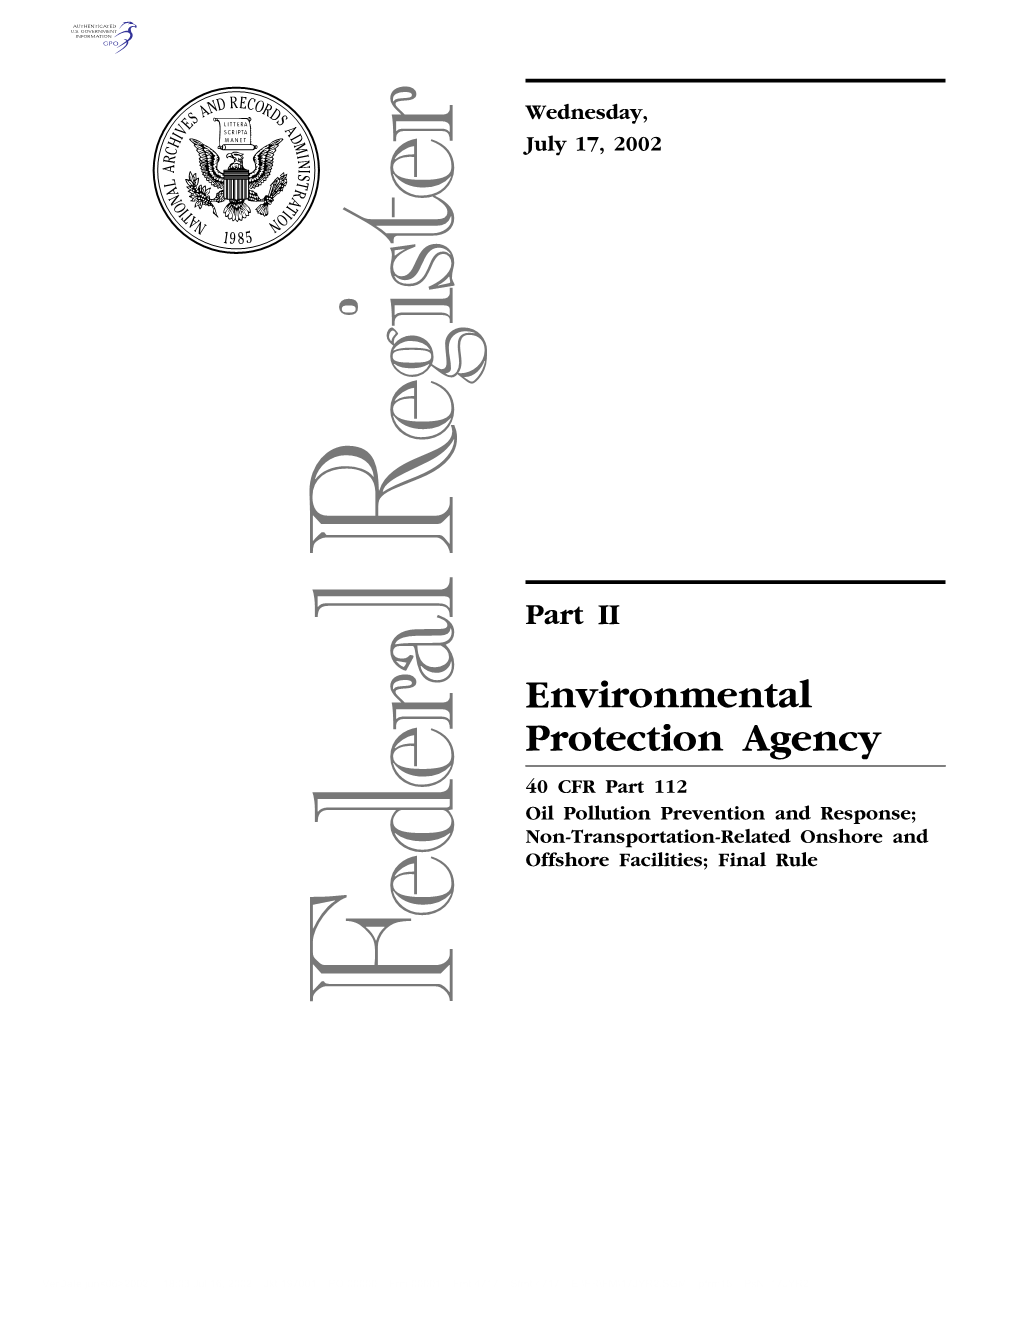 Environmental Protection Agency 40 CFR Part 112 Oil Pollution Prevention and Response; Non-Transportation-Related Onshore and Offshore Facilities; Final Rule